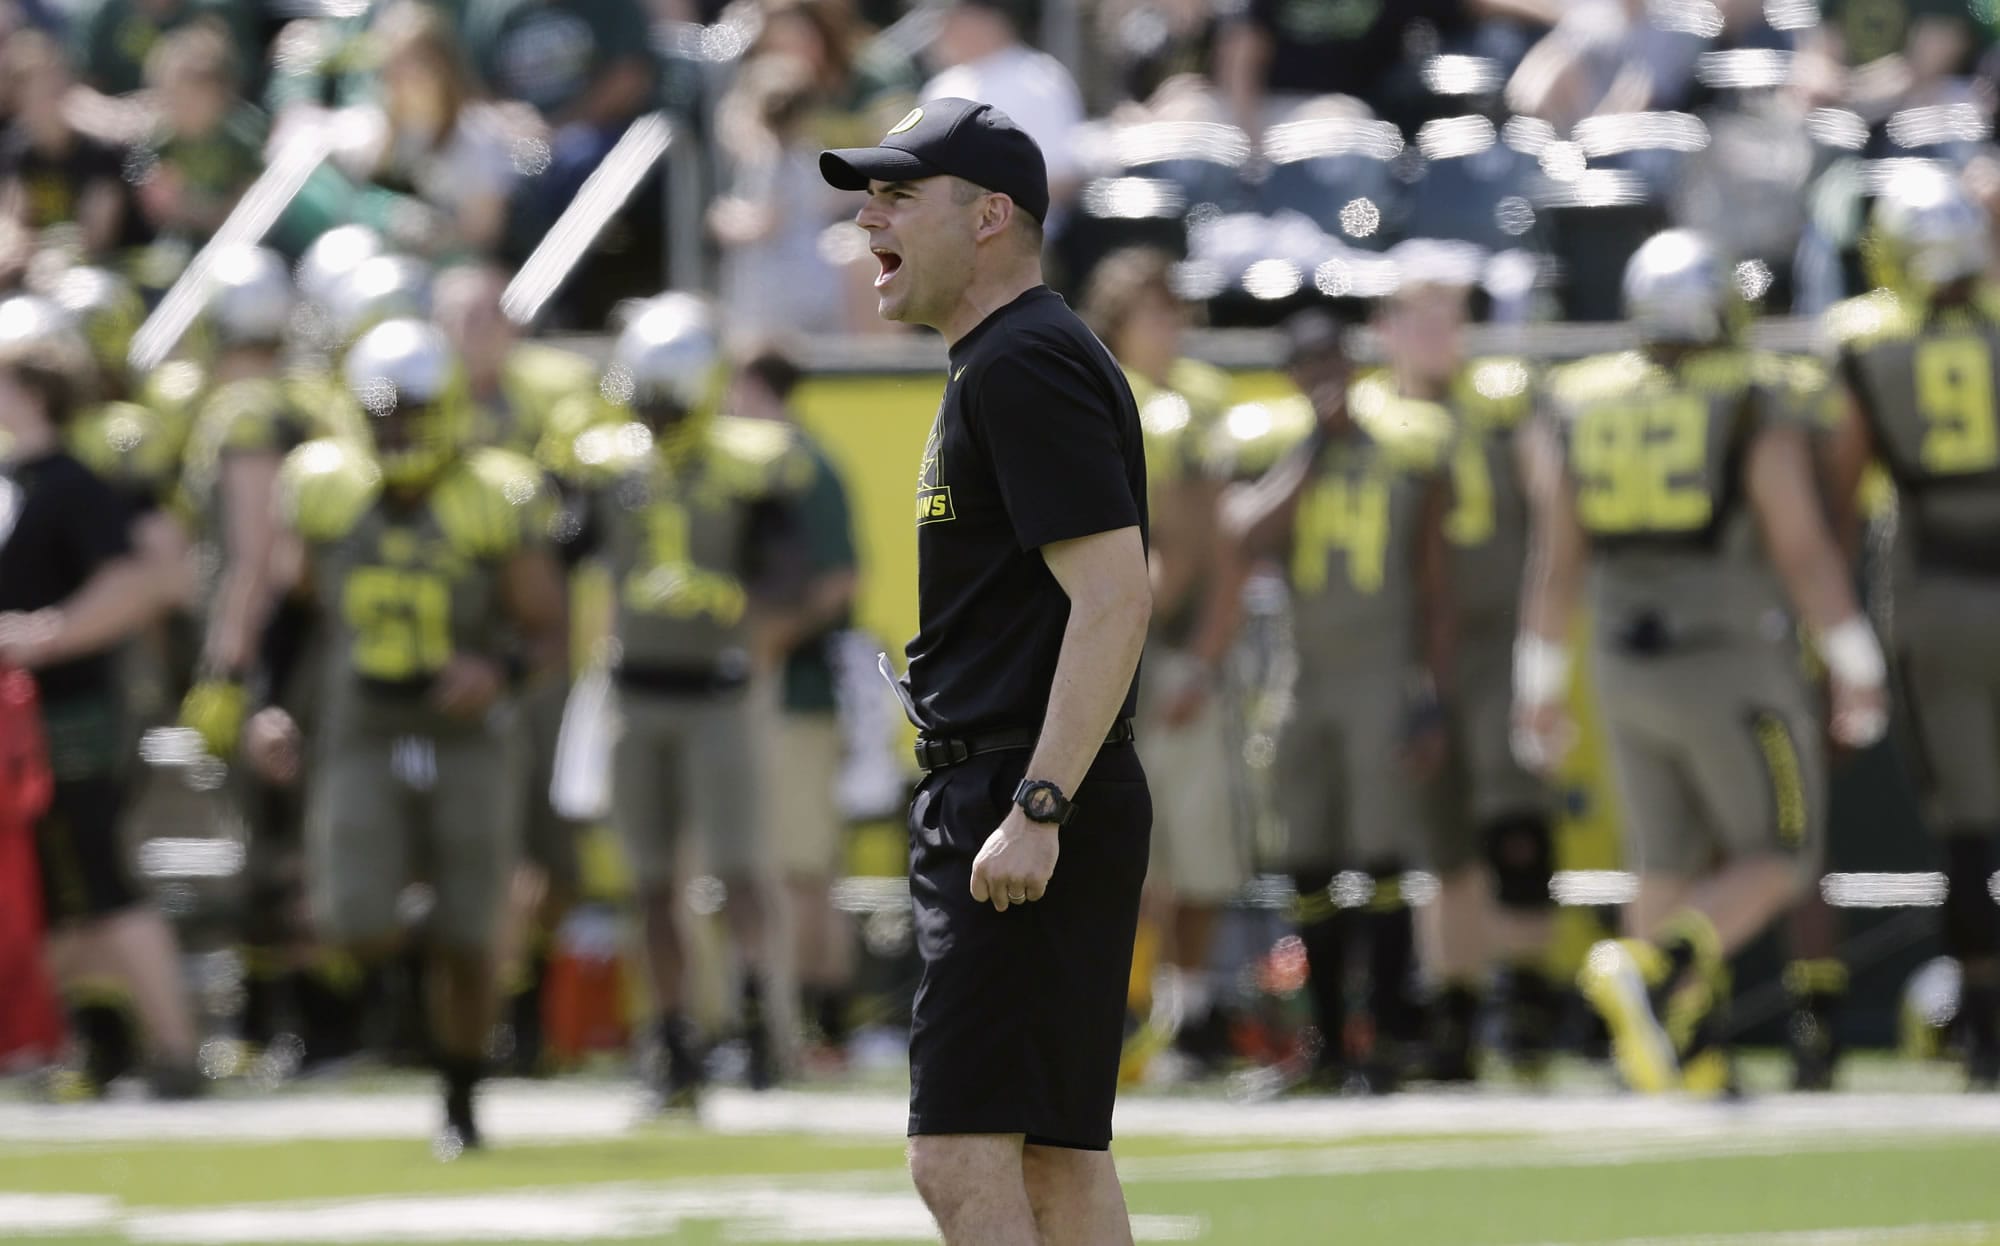 Oregon football coach Mark Helfrich shouts during their spring game in Eugene, Ore. Helfrich believes he is up to the task of keeping the Ducks flying high.